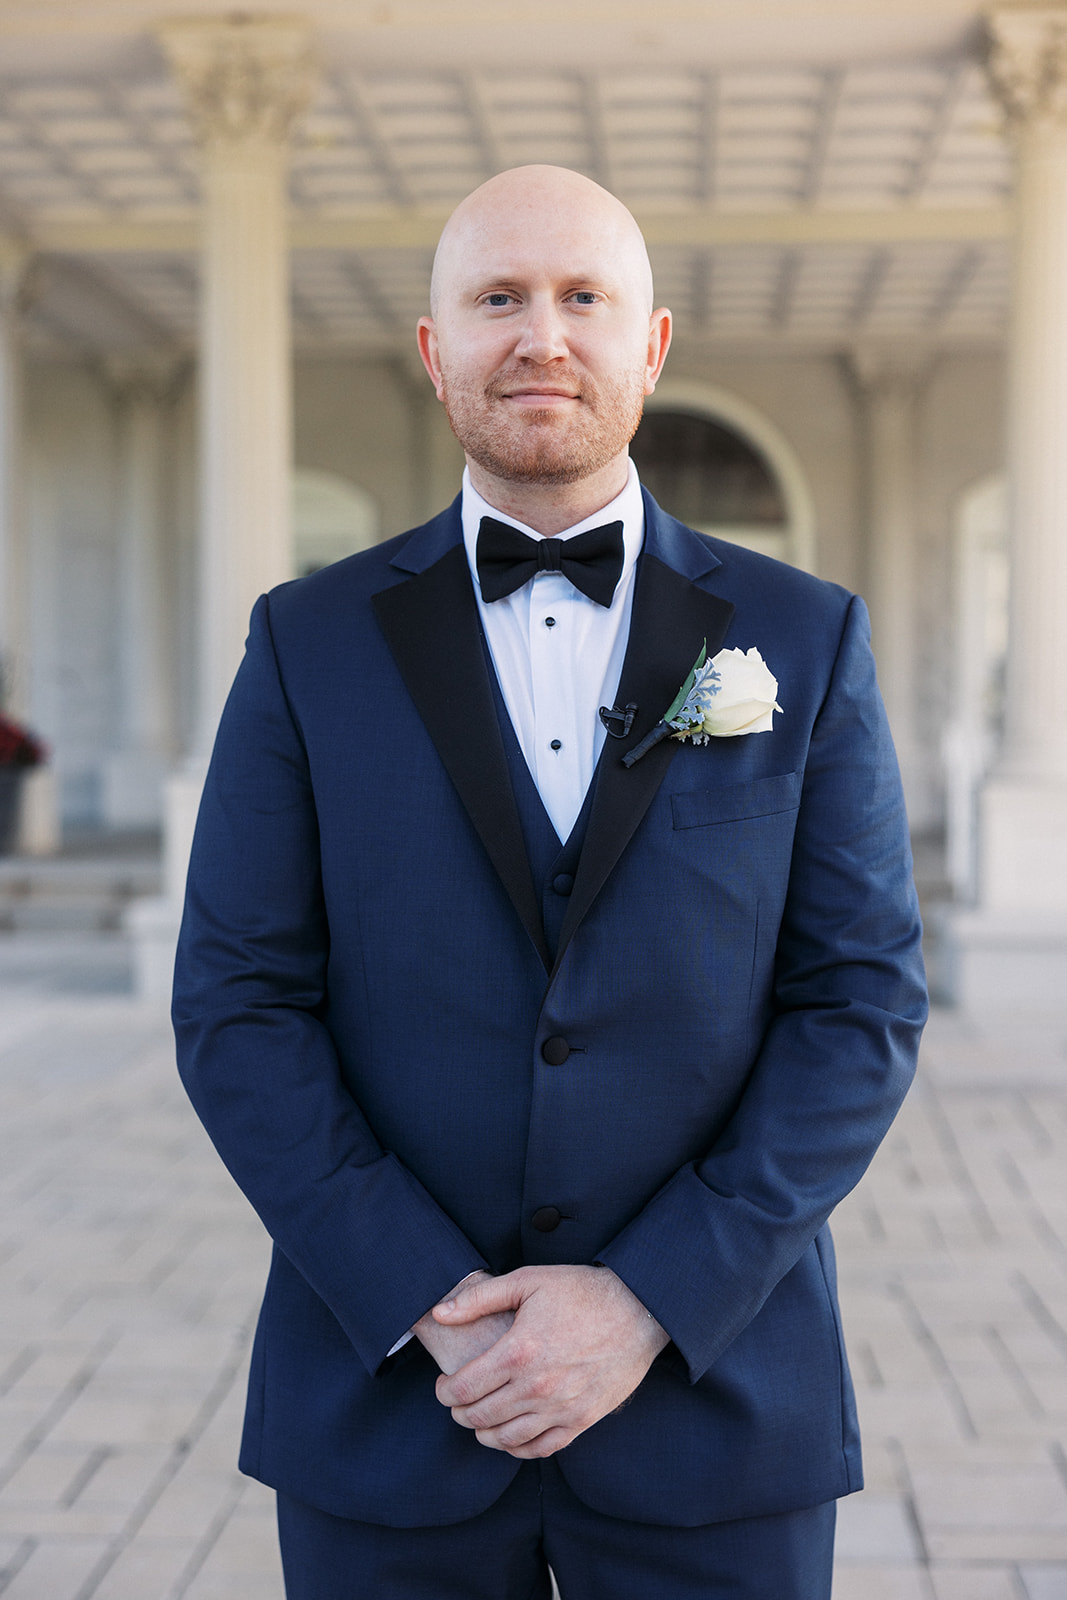 A groom in a blue suit stands with hands crossed in an ornate car port front entrance